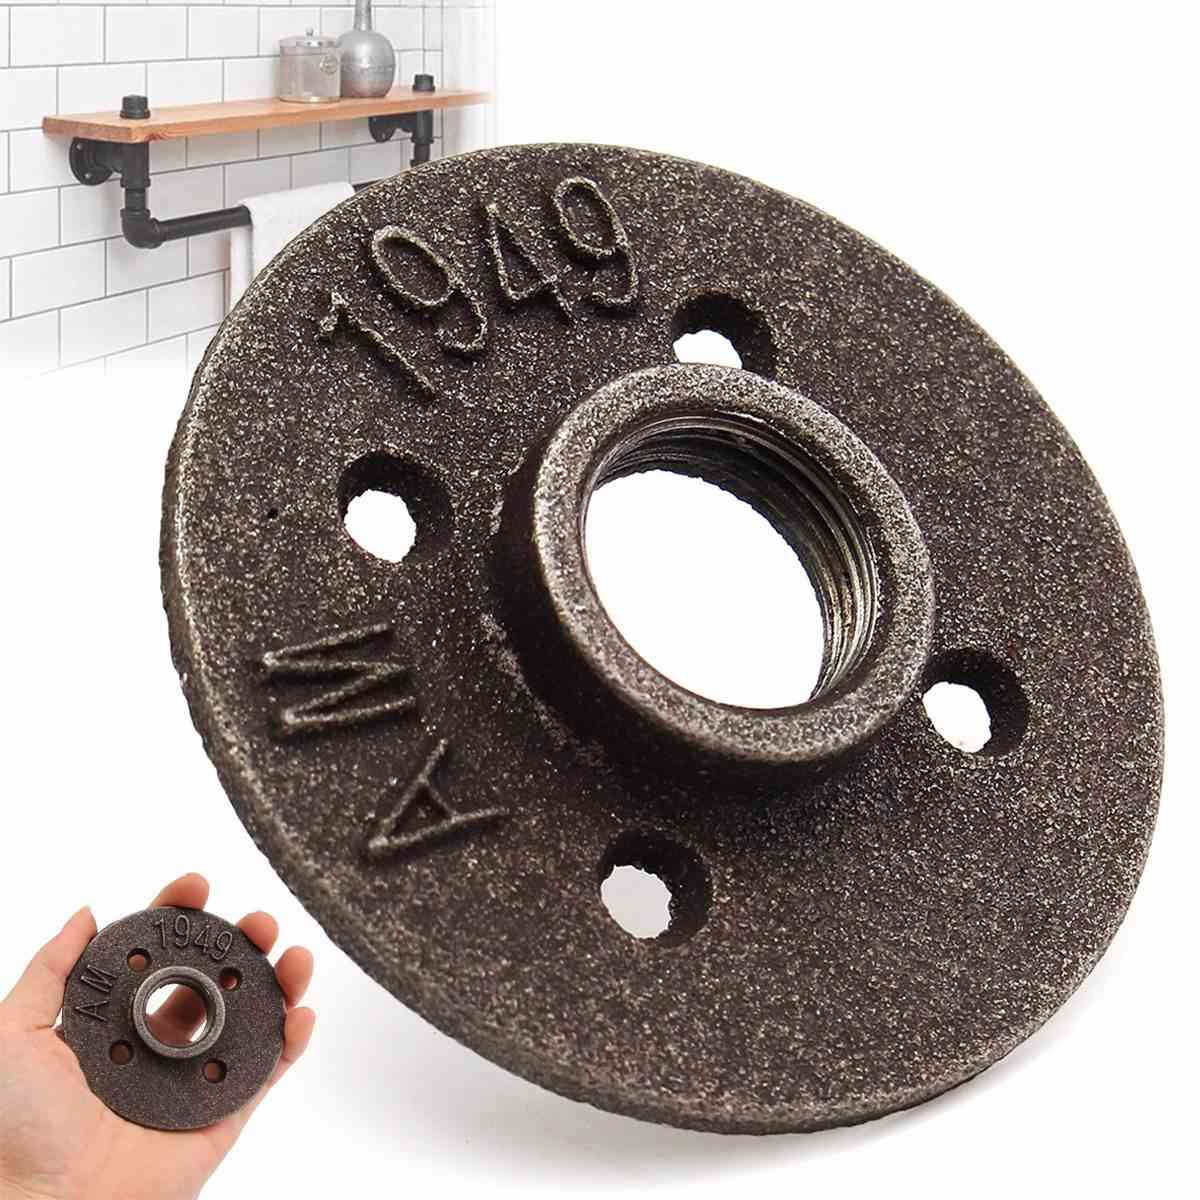 Flanges Iron Pipe Fittings Plumbing Wall Mount - Antique Piece Hardware Tool Cast Decorative